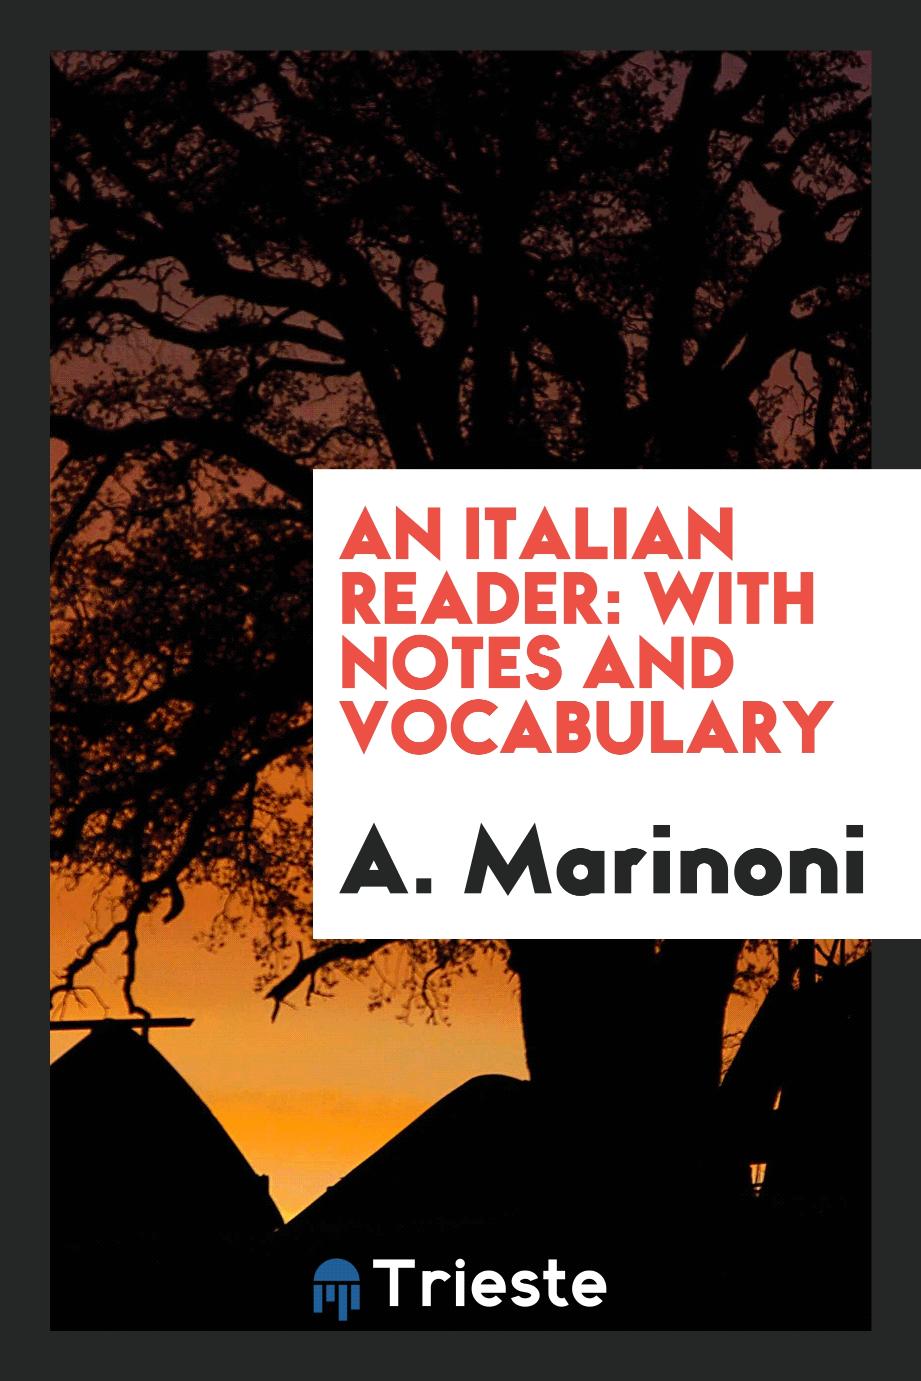 An Italian reader: with notes and vocabulary